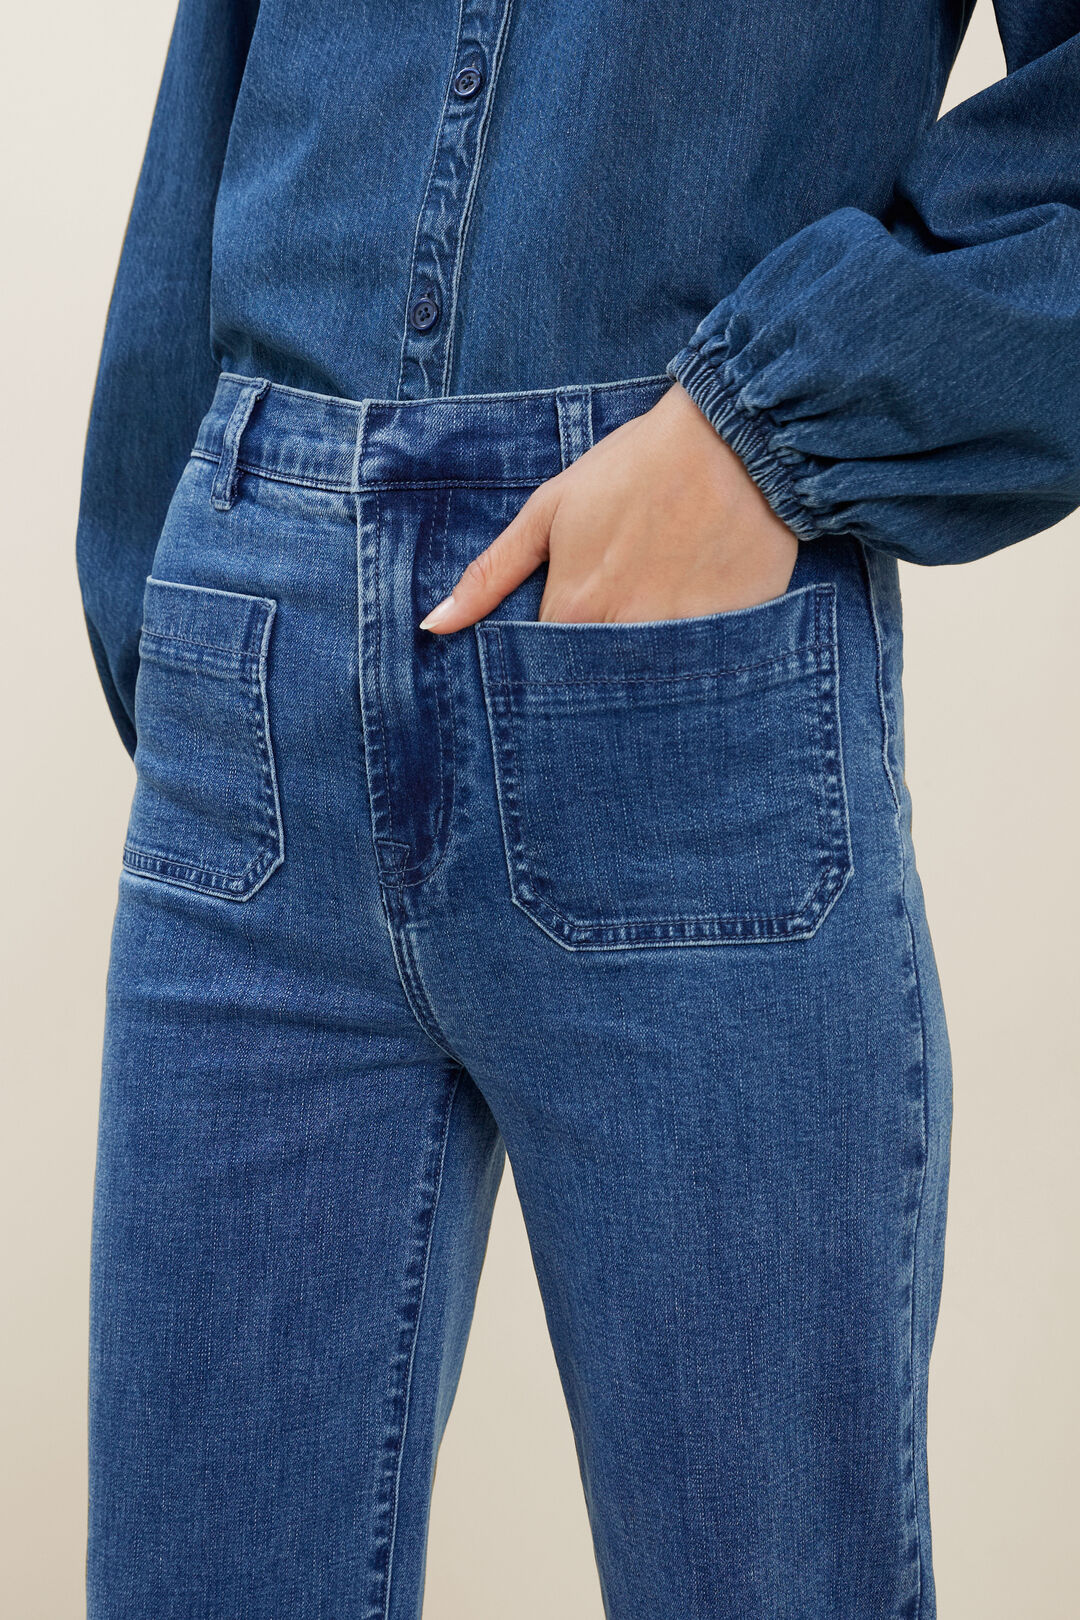 Front Pocket Jeans | Seed Heritage